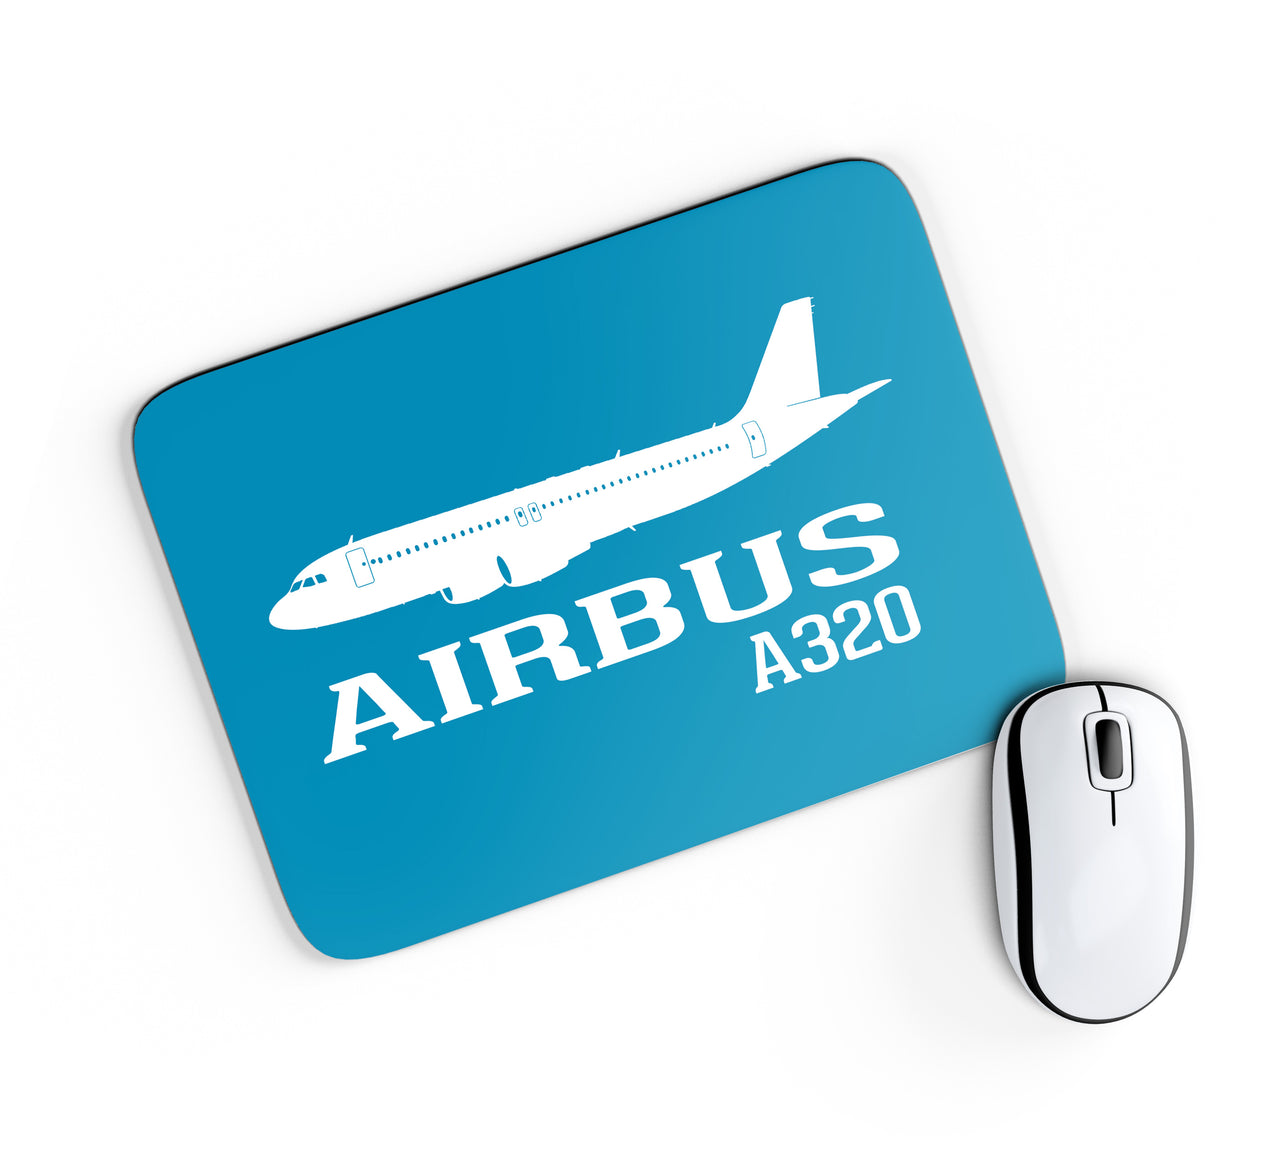 Airbus A320 Printed Designed Mouse Pads